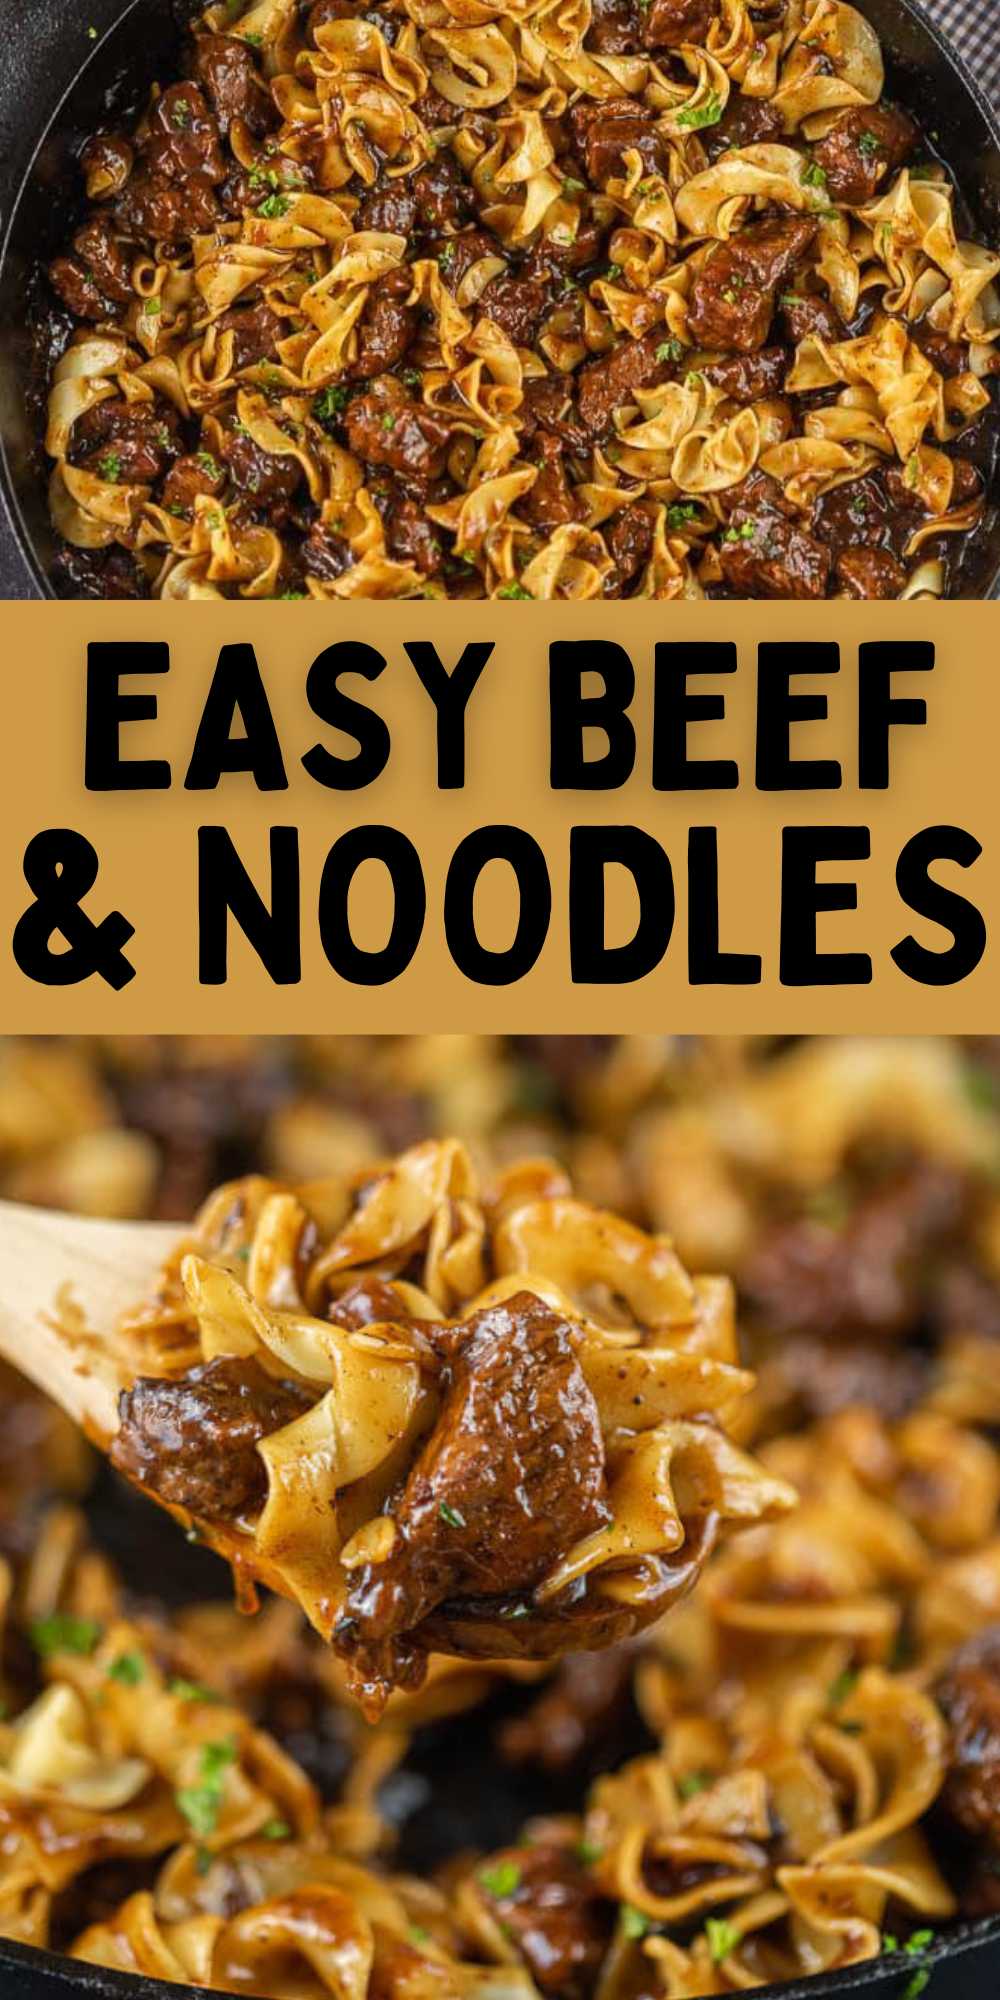 Make Beef and noodles recipe for a quick weeknight dinner. Tender beef with the best flavor make an incredible dish to serve over pasta. The great thing about this recipe is that you can make this either in your slow cooker, instant pot or on your stove. It is easy to make with easy ingredients. #eatingonadime #beefandnoodles #easyskilletrecipe